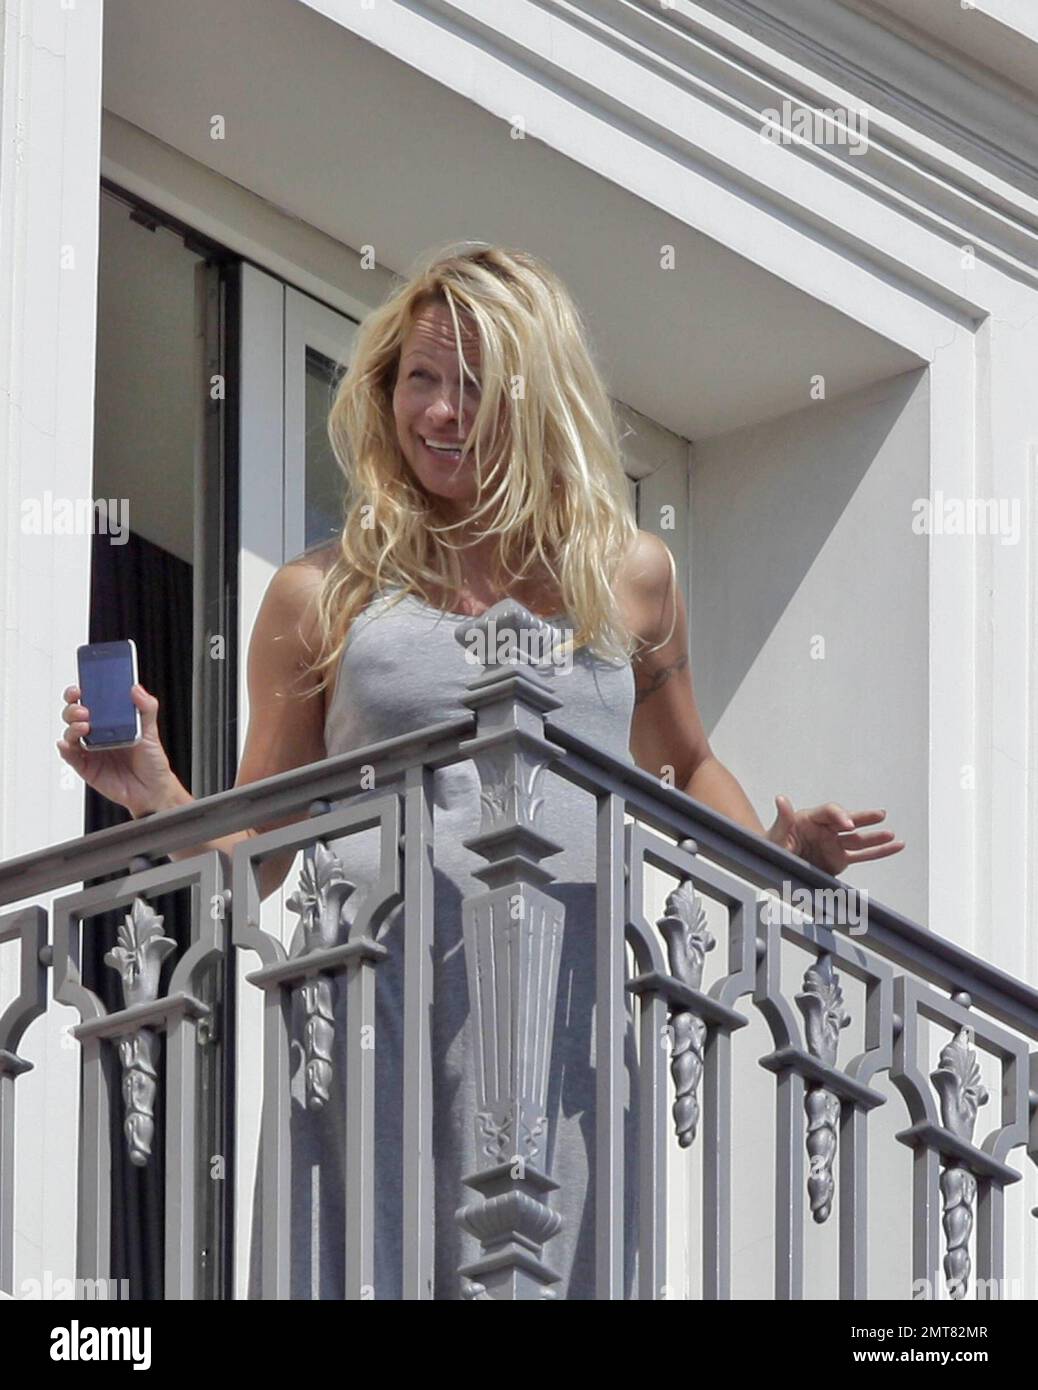 GREECE OUT - EXCLUSIVE!! Anderson takes to the balcony of her luxury hotel as though she's just out of bed. Wearing her night gown and no makeup, Pam